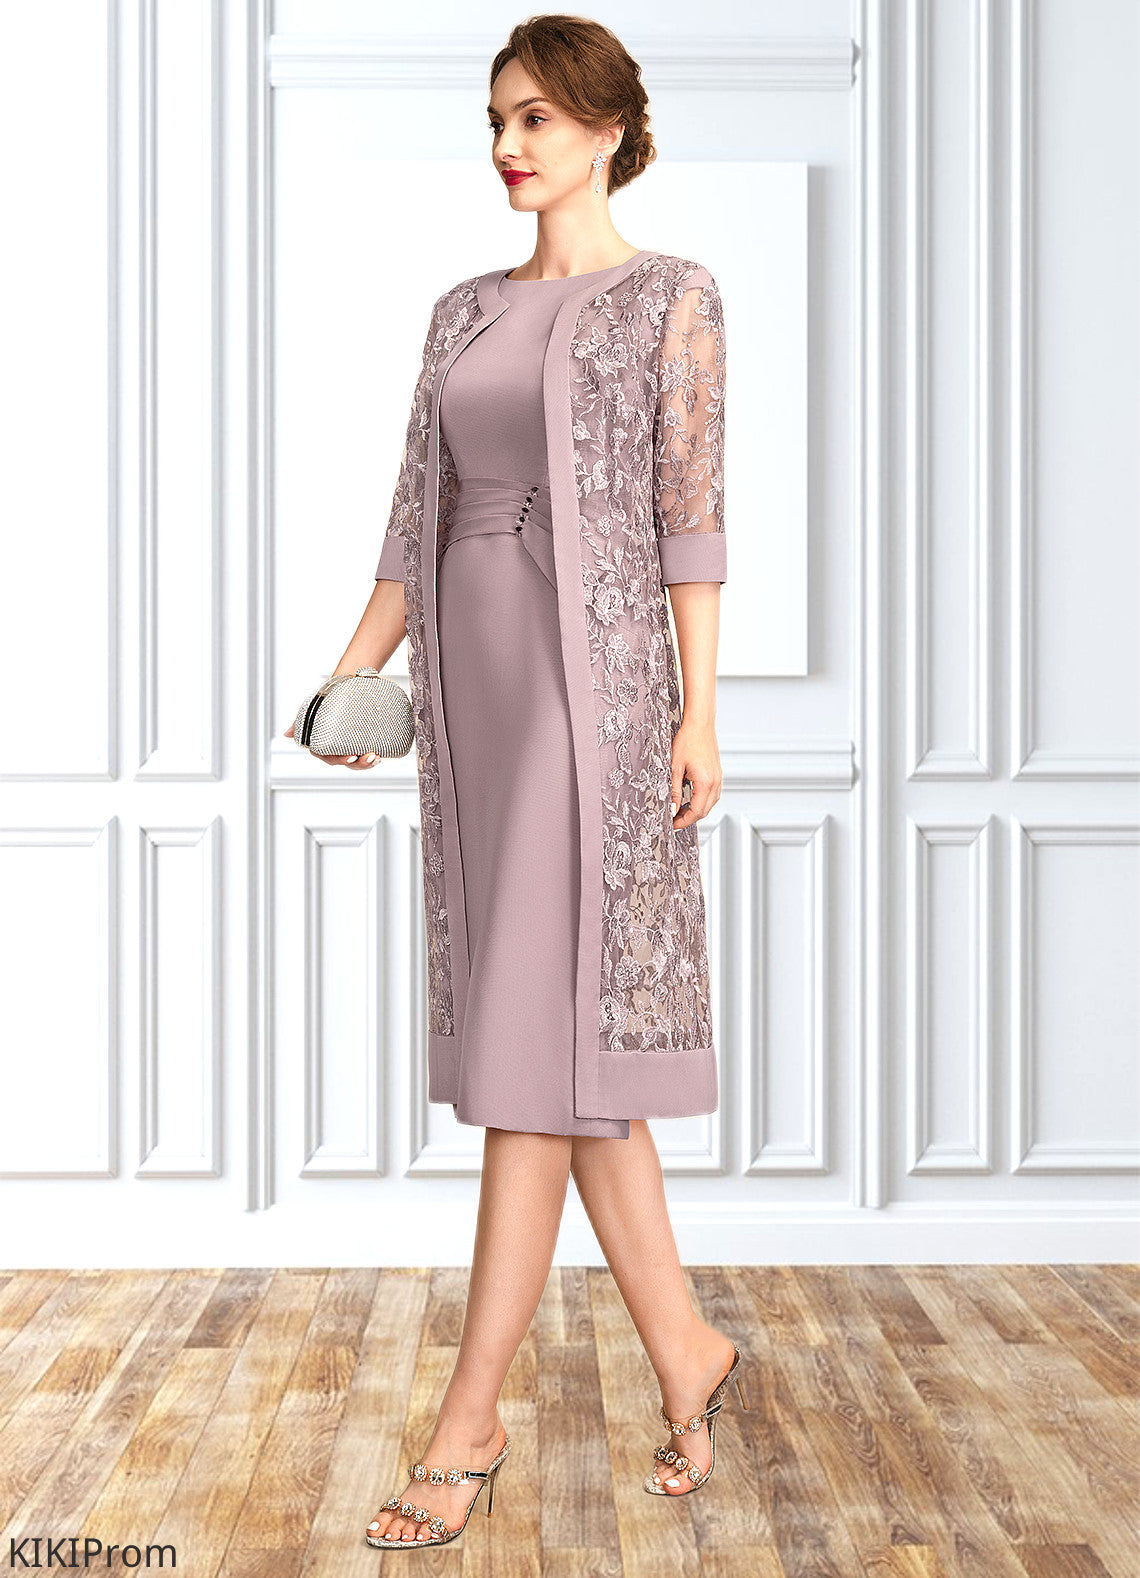 Jo Sheath/Column Scoop Neck Knee-Length Chiffon Mother of the Bride Dress With Ruffle Sequins DZ126P0015023